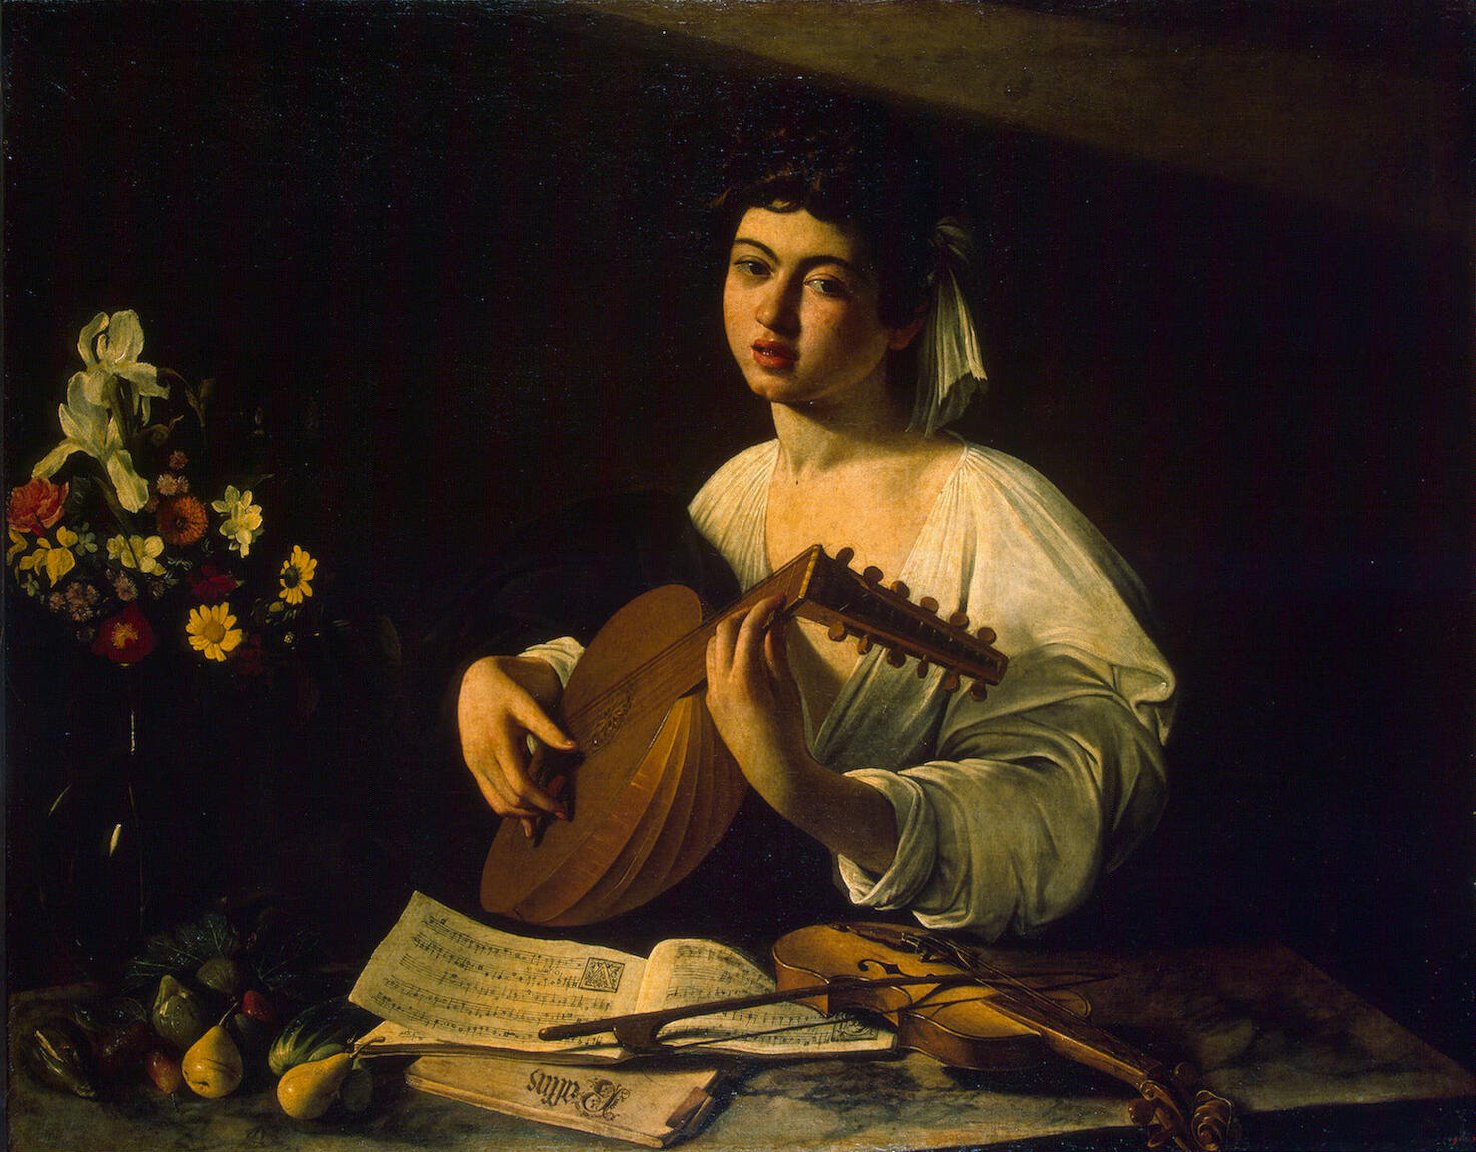 The Lute Player (1596).